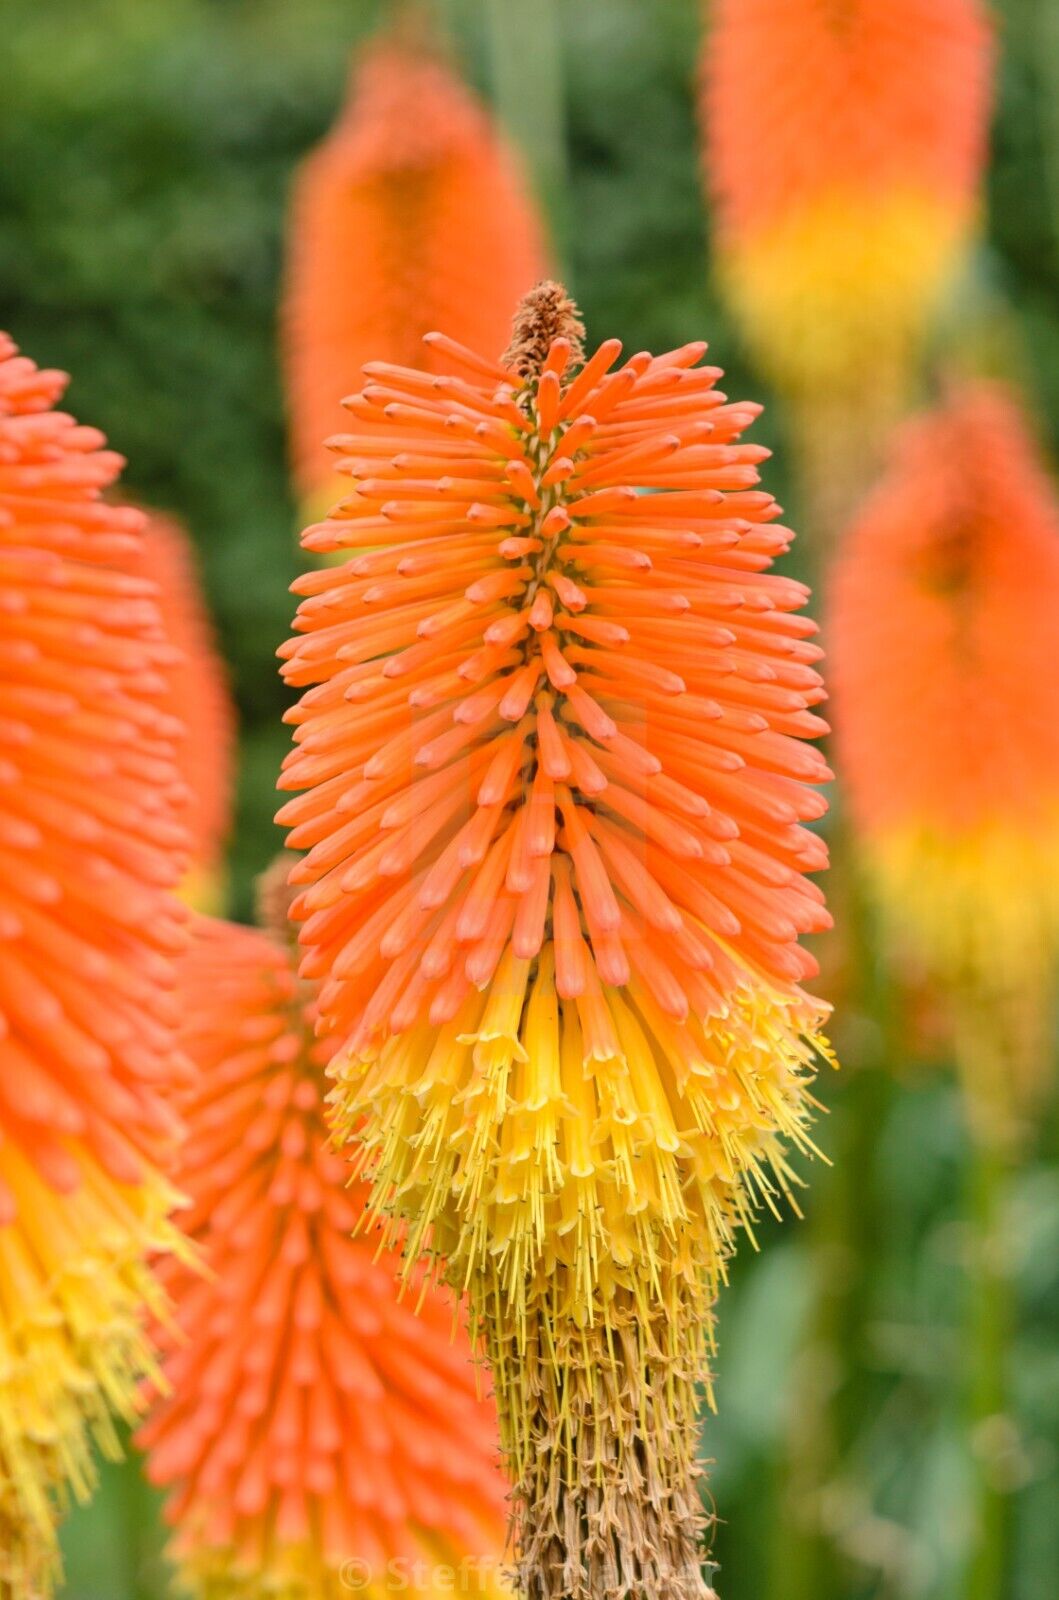 25 Nobilis Torch Lily Hot Poker Flower Seeds Perennial Seed 847 US SELLER